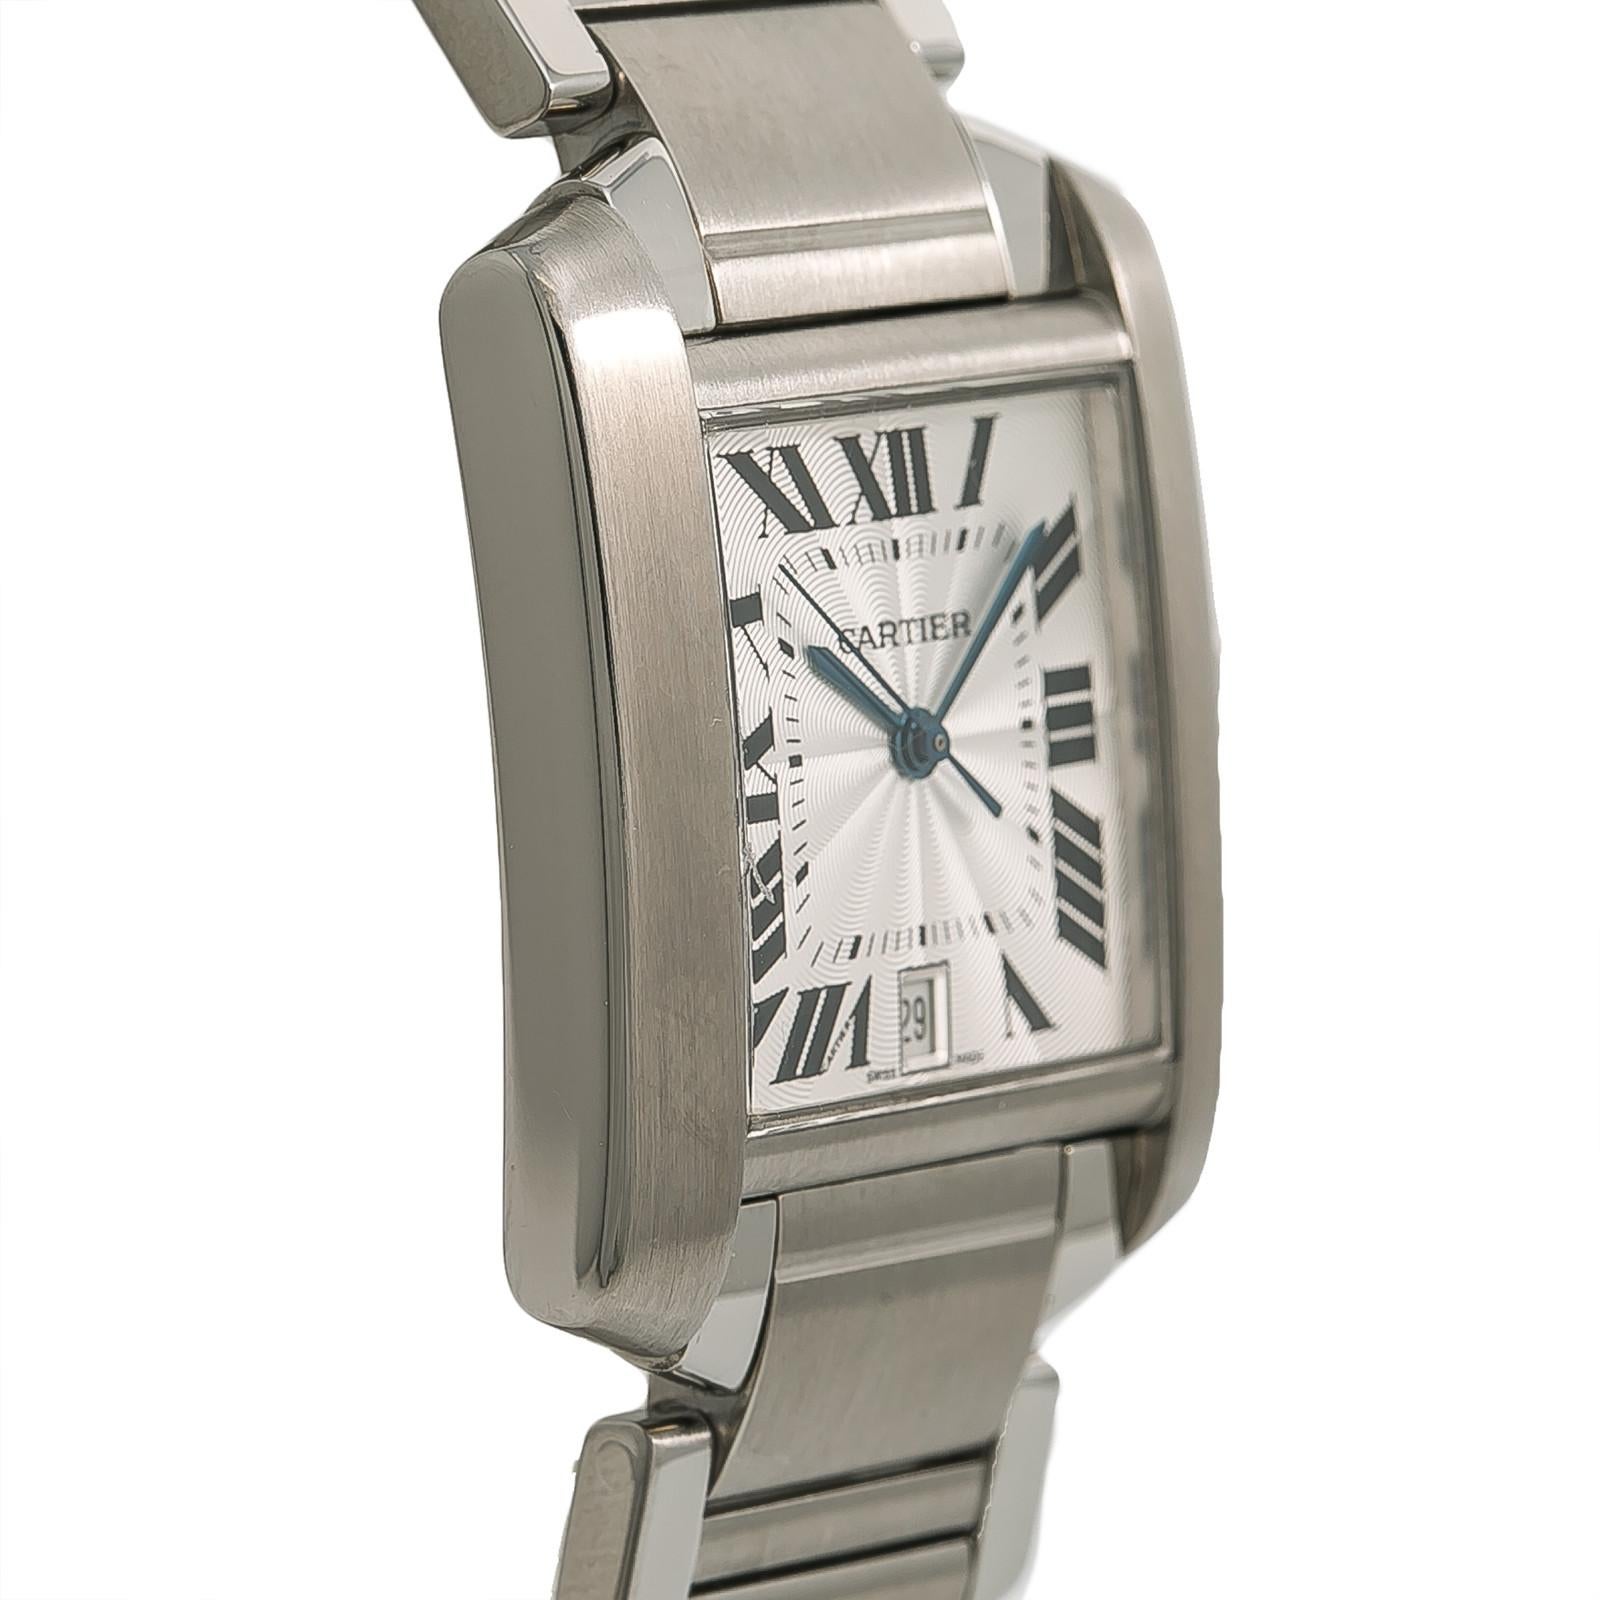 Cartier Tank Francaise2520, Dial Certified Authentic In Excellent Condition For Sale In Miami, FL